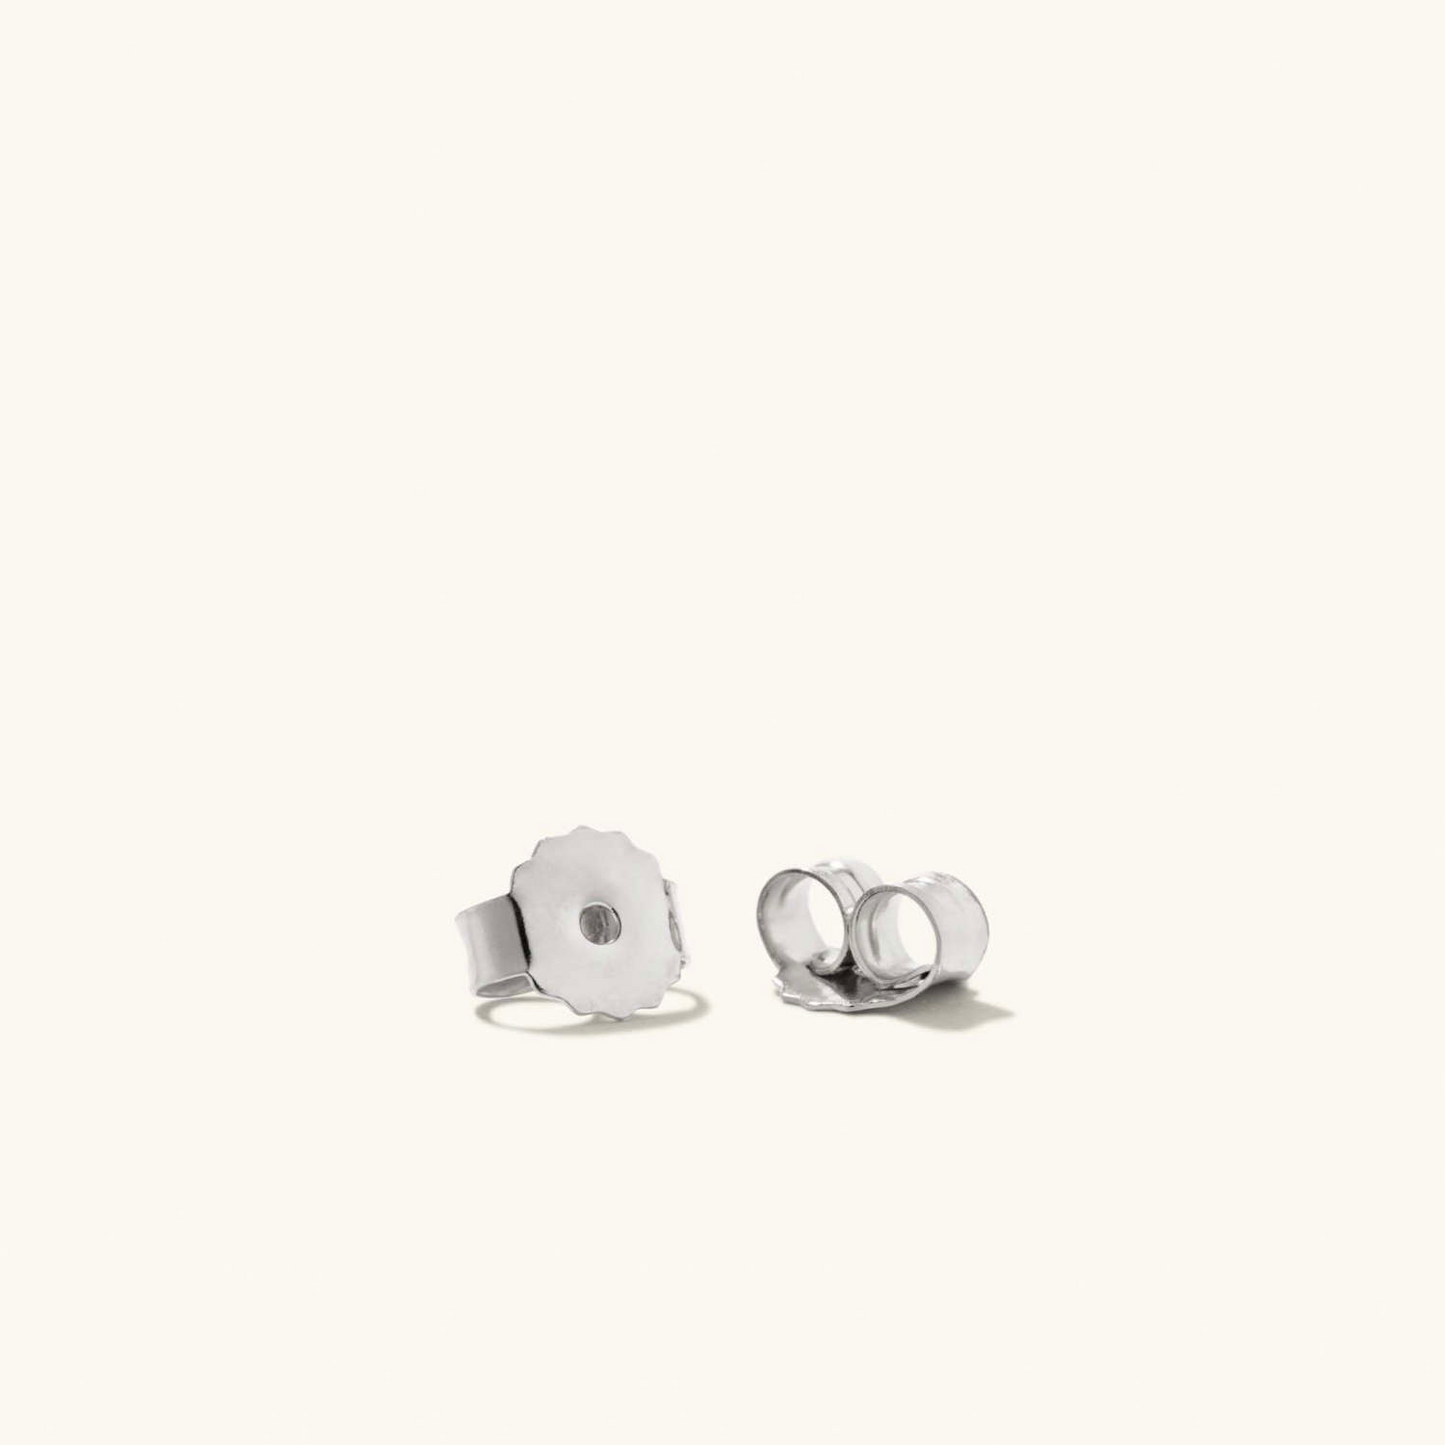 Round Cut Natural Diamond 14K Gold Round Stud Earrings